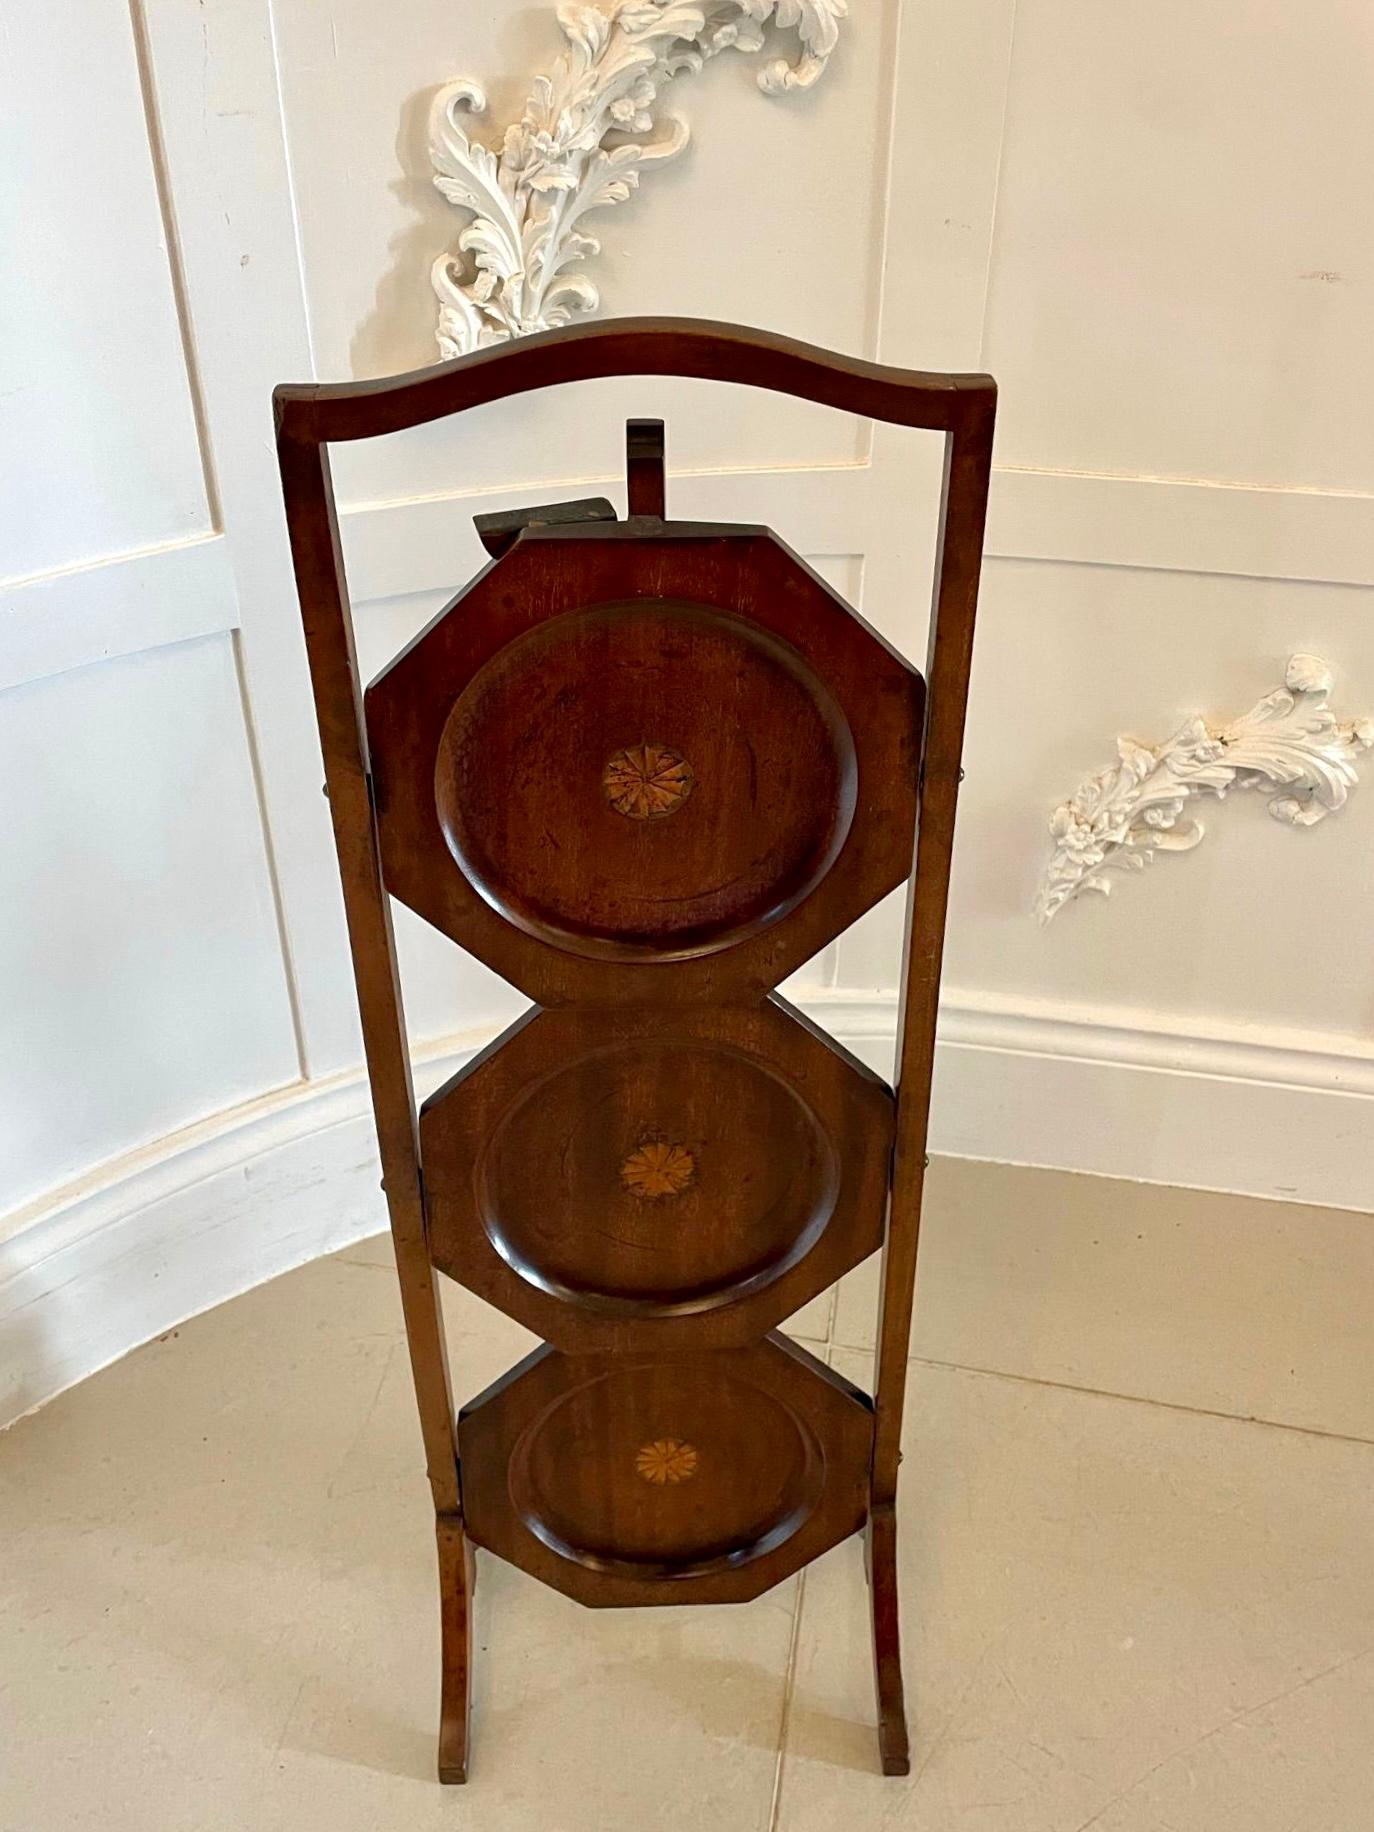 Antique Edwardian Inlaid Mahogany 3 Tier Cake Stand For Sale 1